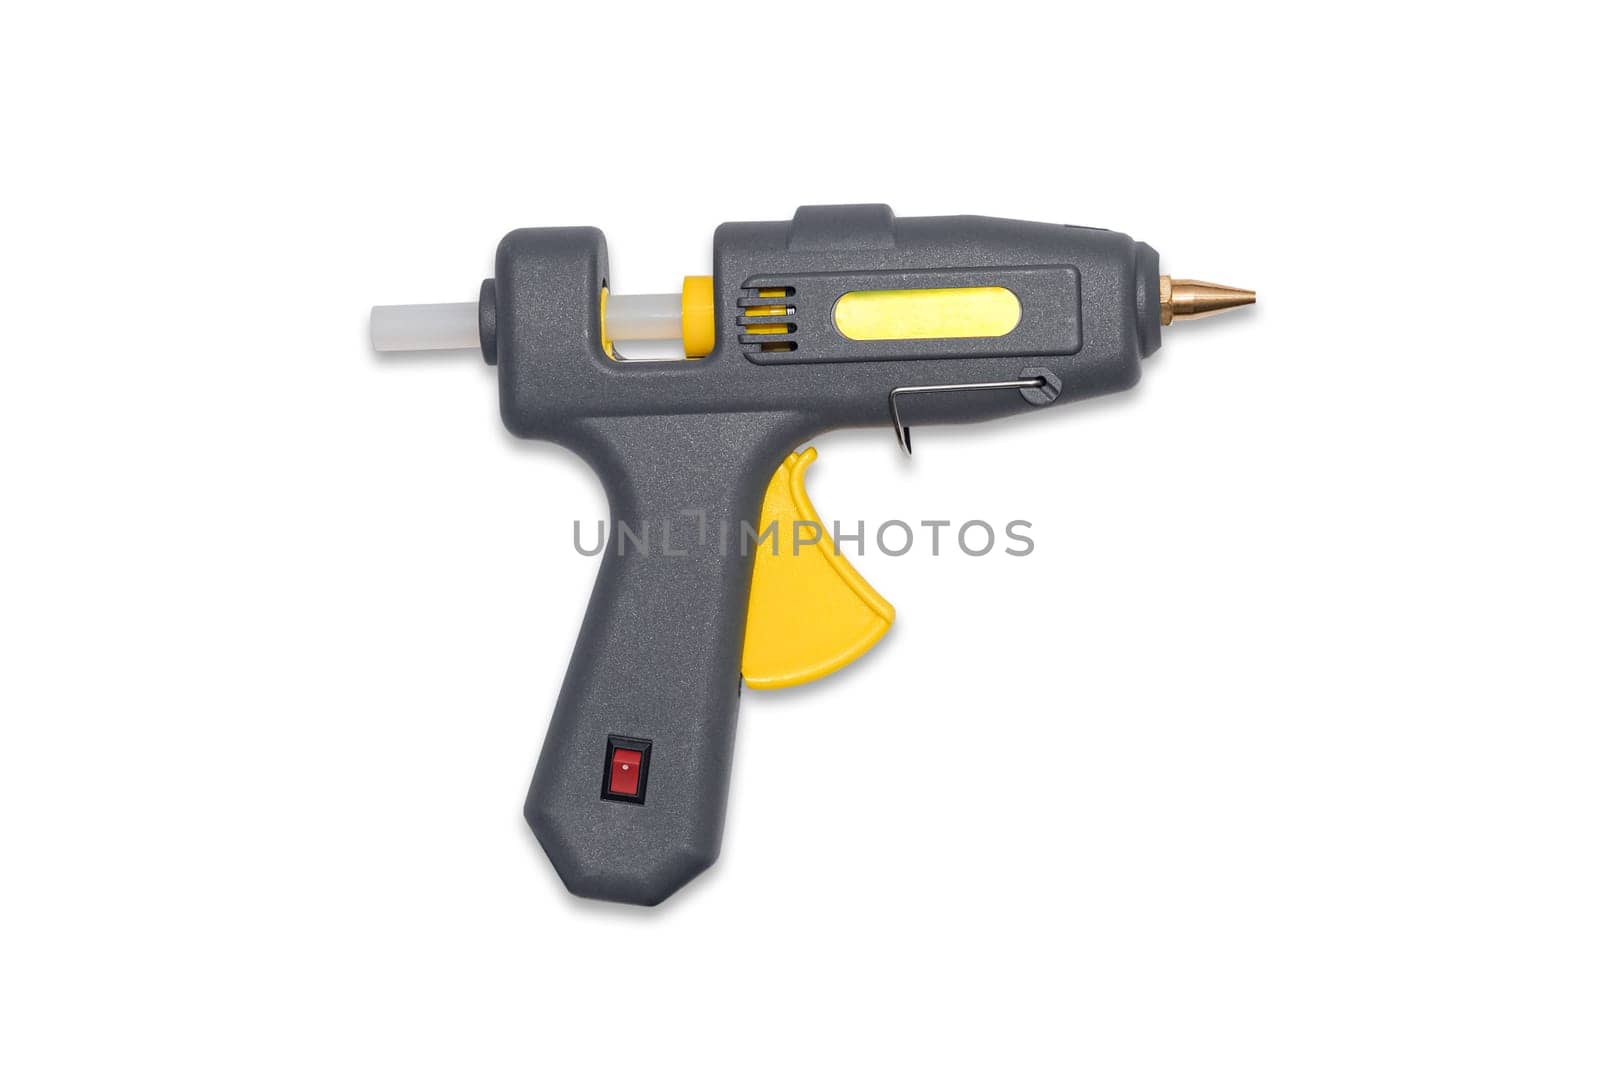 Hot glue gun wireless isolated on white background. Electric hot glue gun isolated on white for hand made and repair.